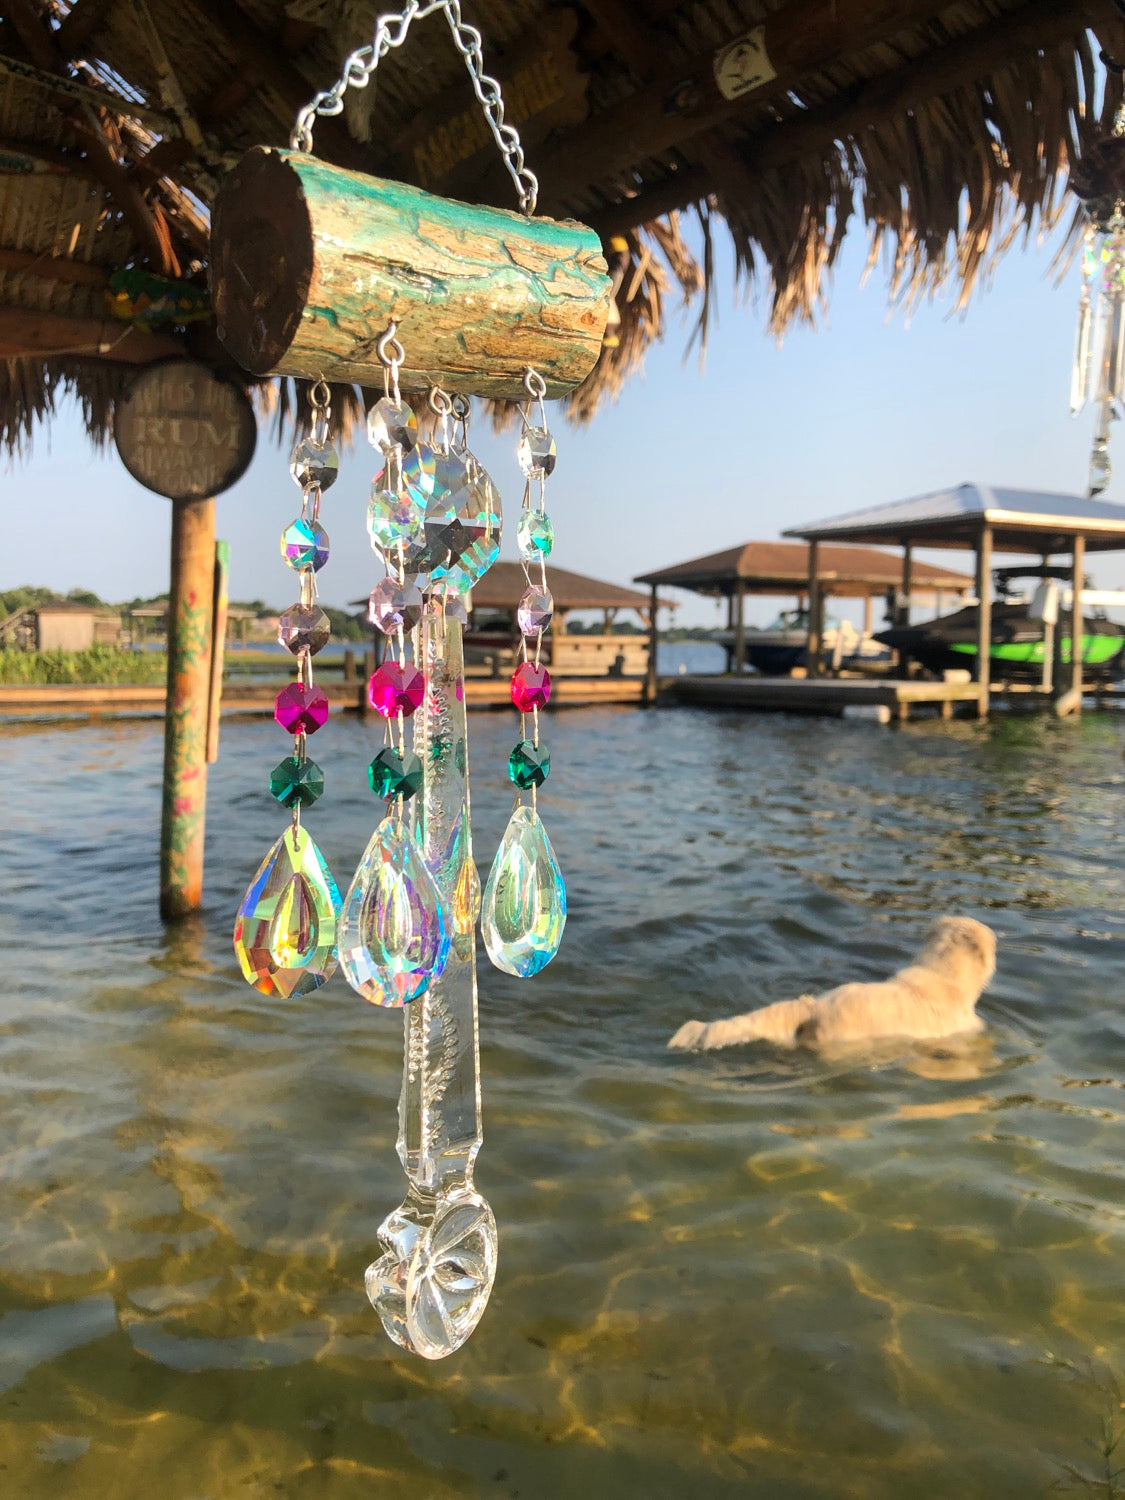 dazzling driftwood wind-chime chandelier crystal sun-catching handmade art unique gifts